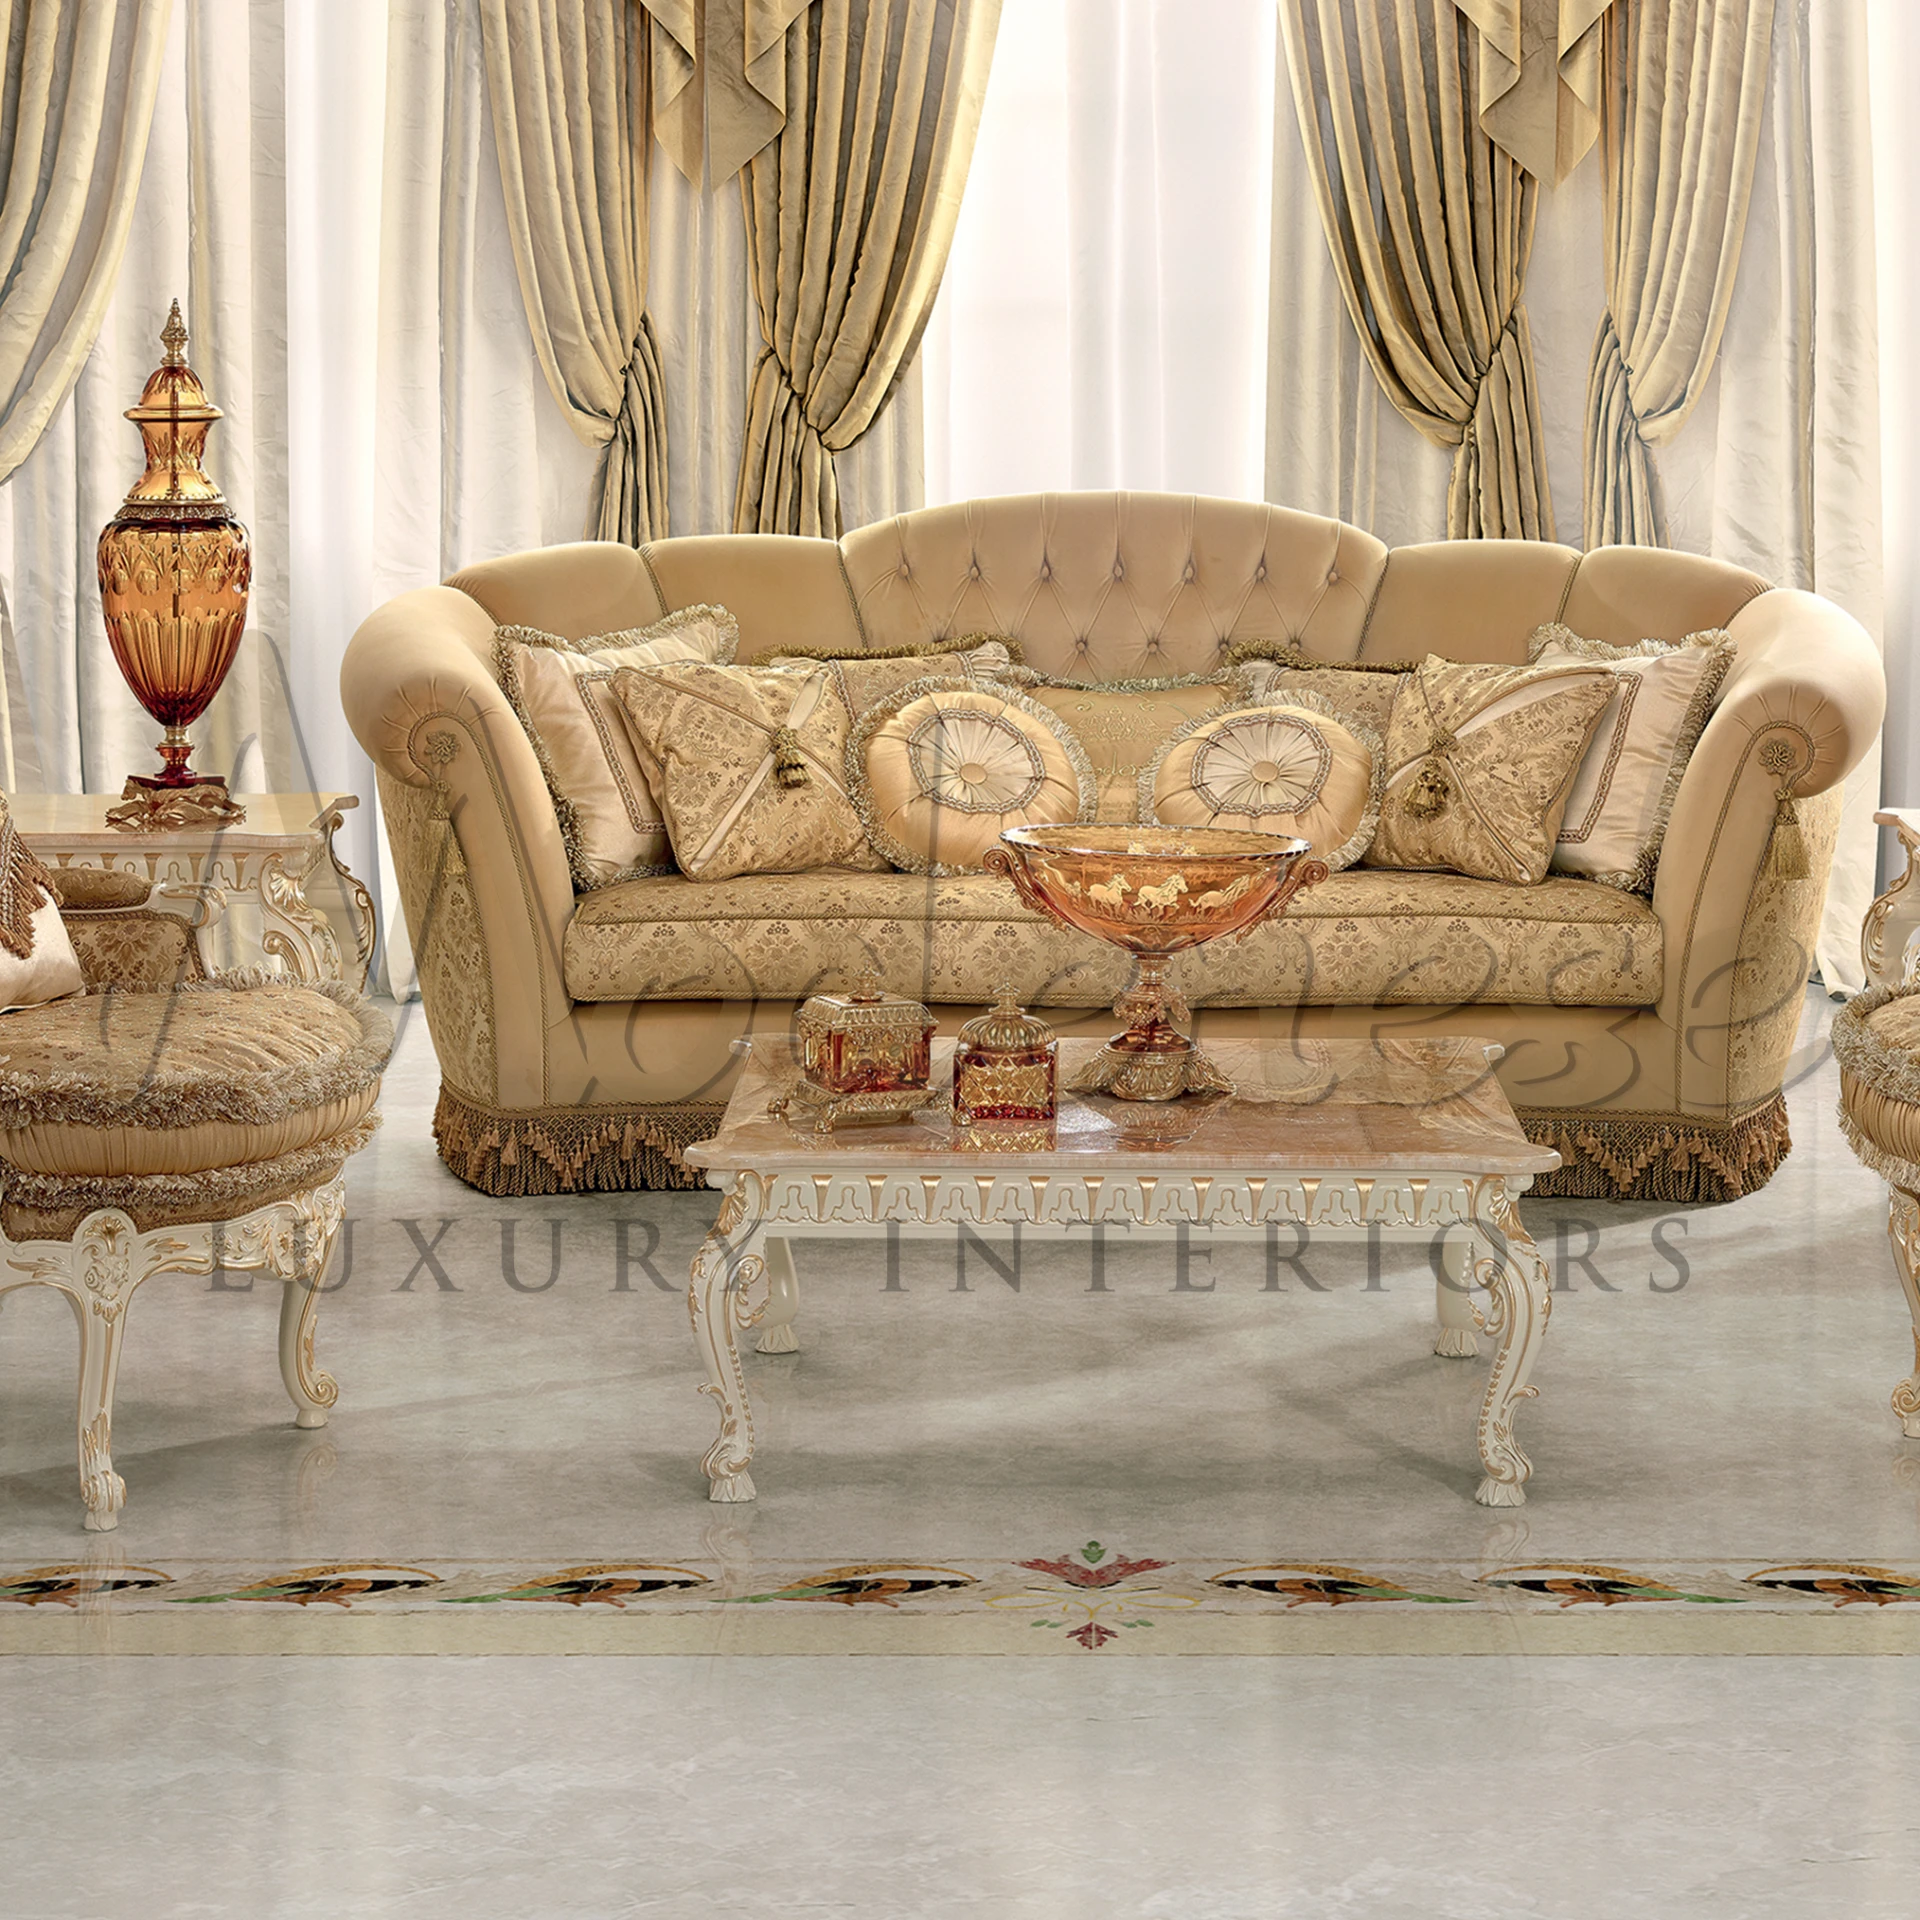 High-quality leather Classic Italian Sofa with baroque design elements, showcasing Italy's legacy in fine furniture crafting.